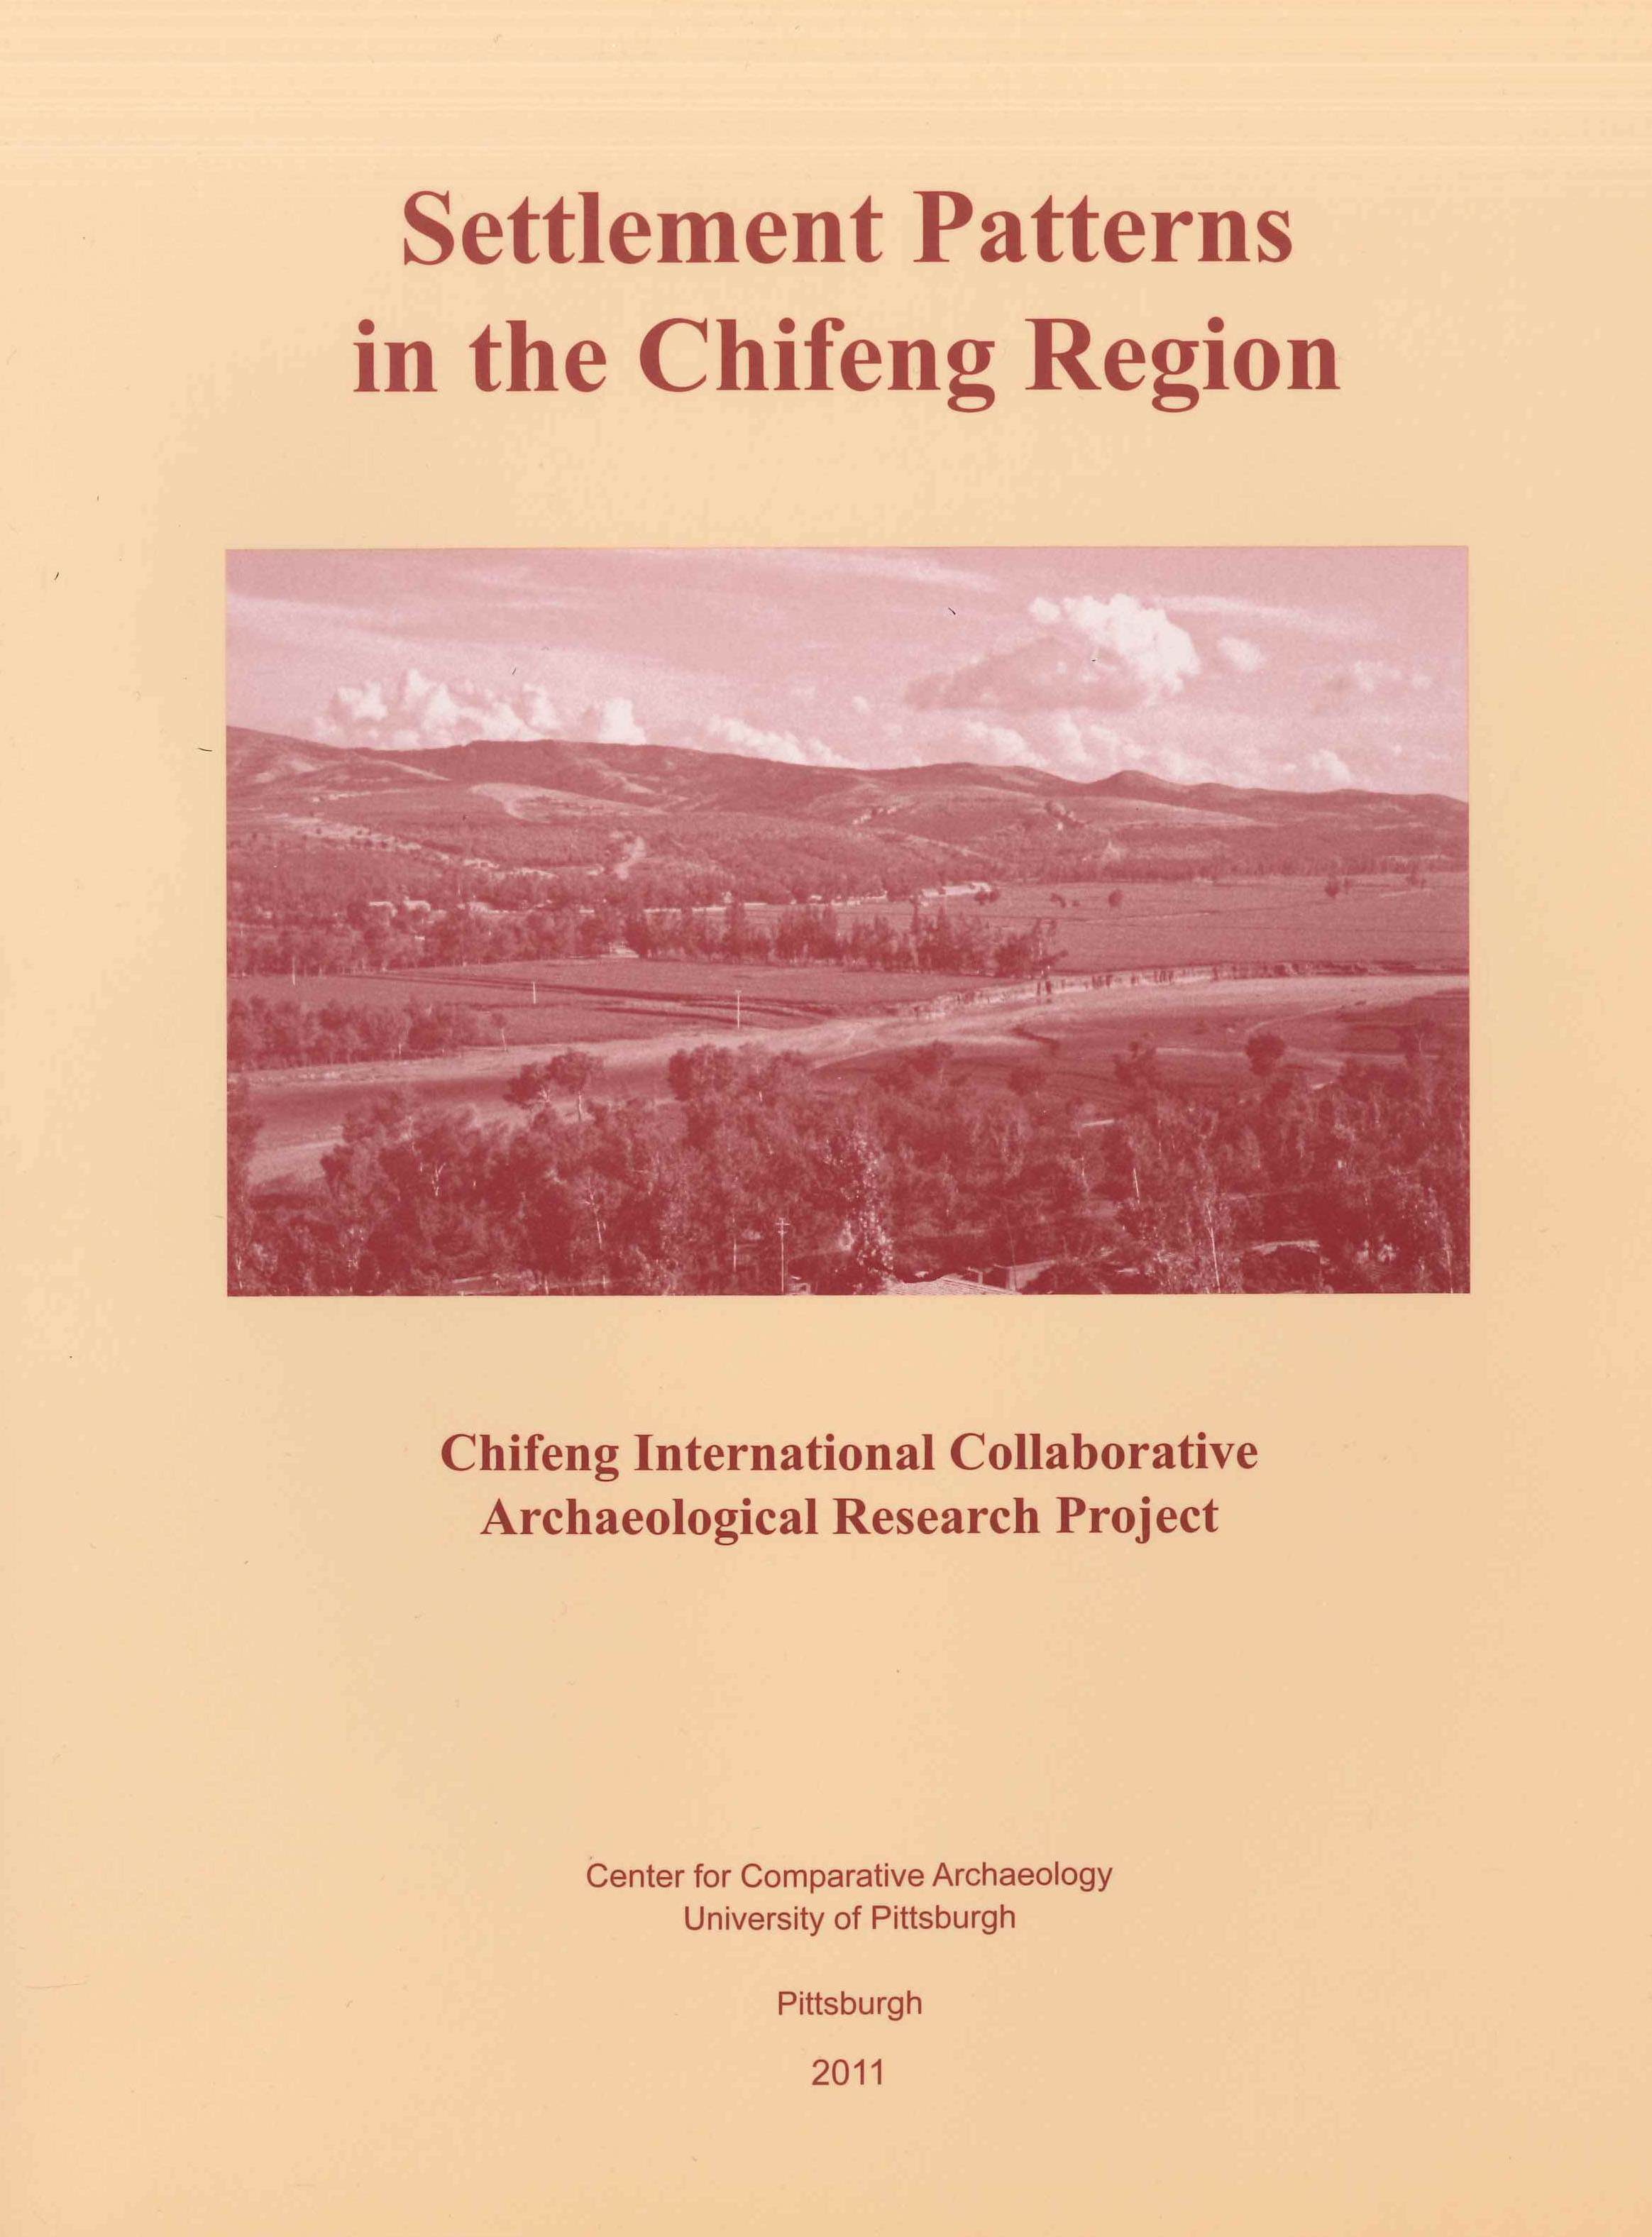 Chifeng region cover